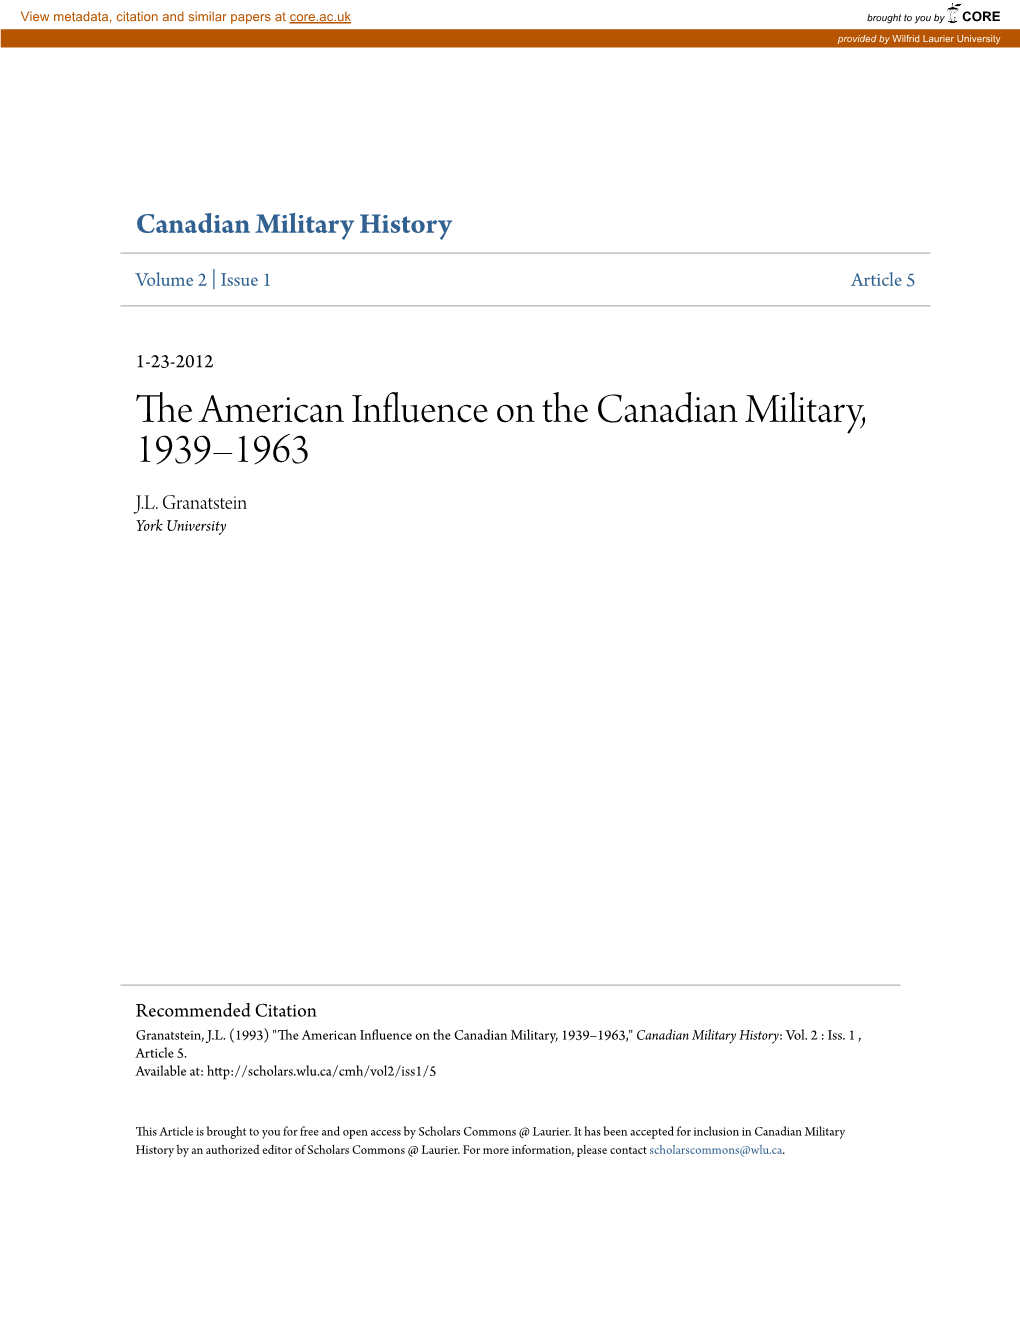 The American Influence on the Canadian Military, 1939Â•Fi1963